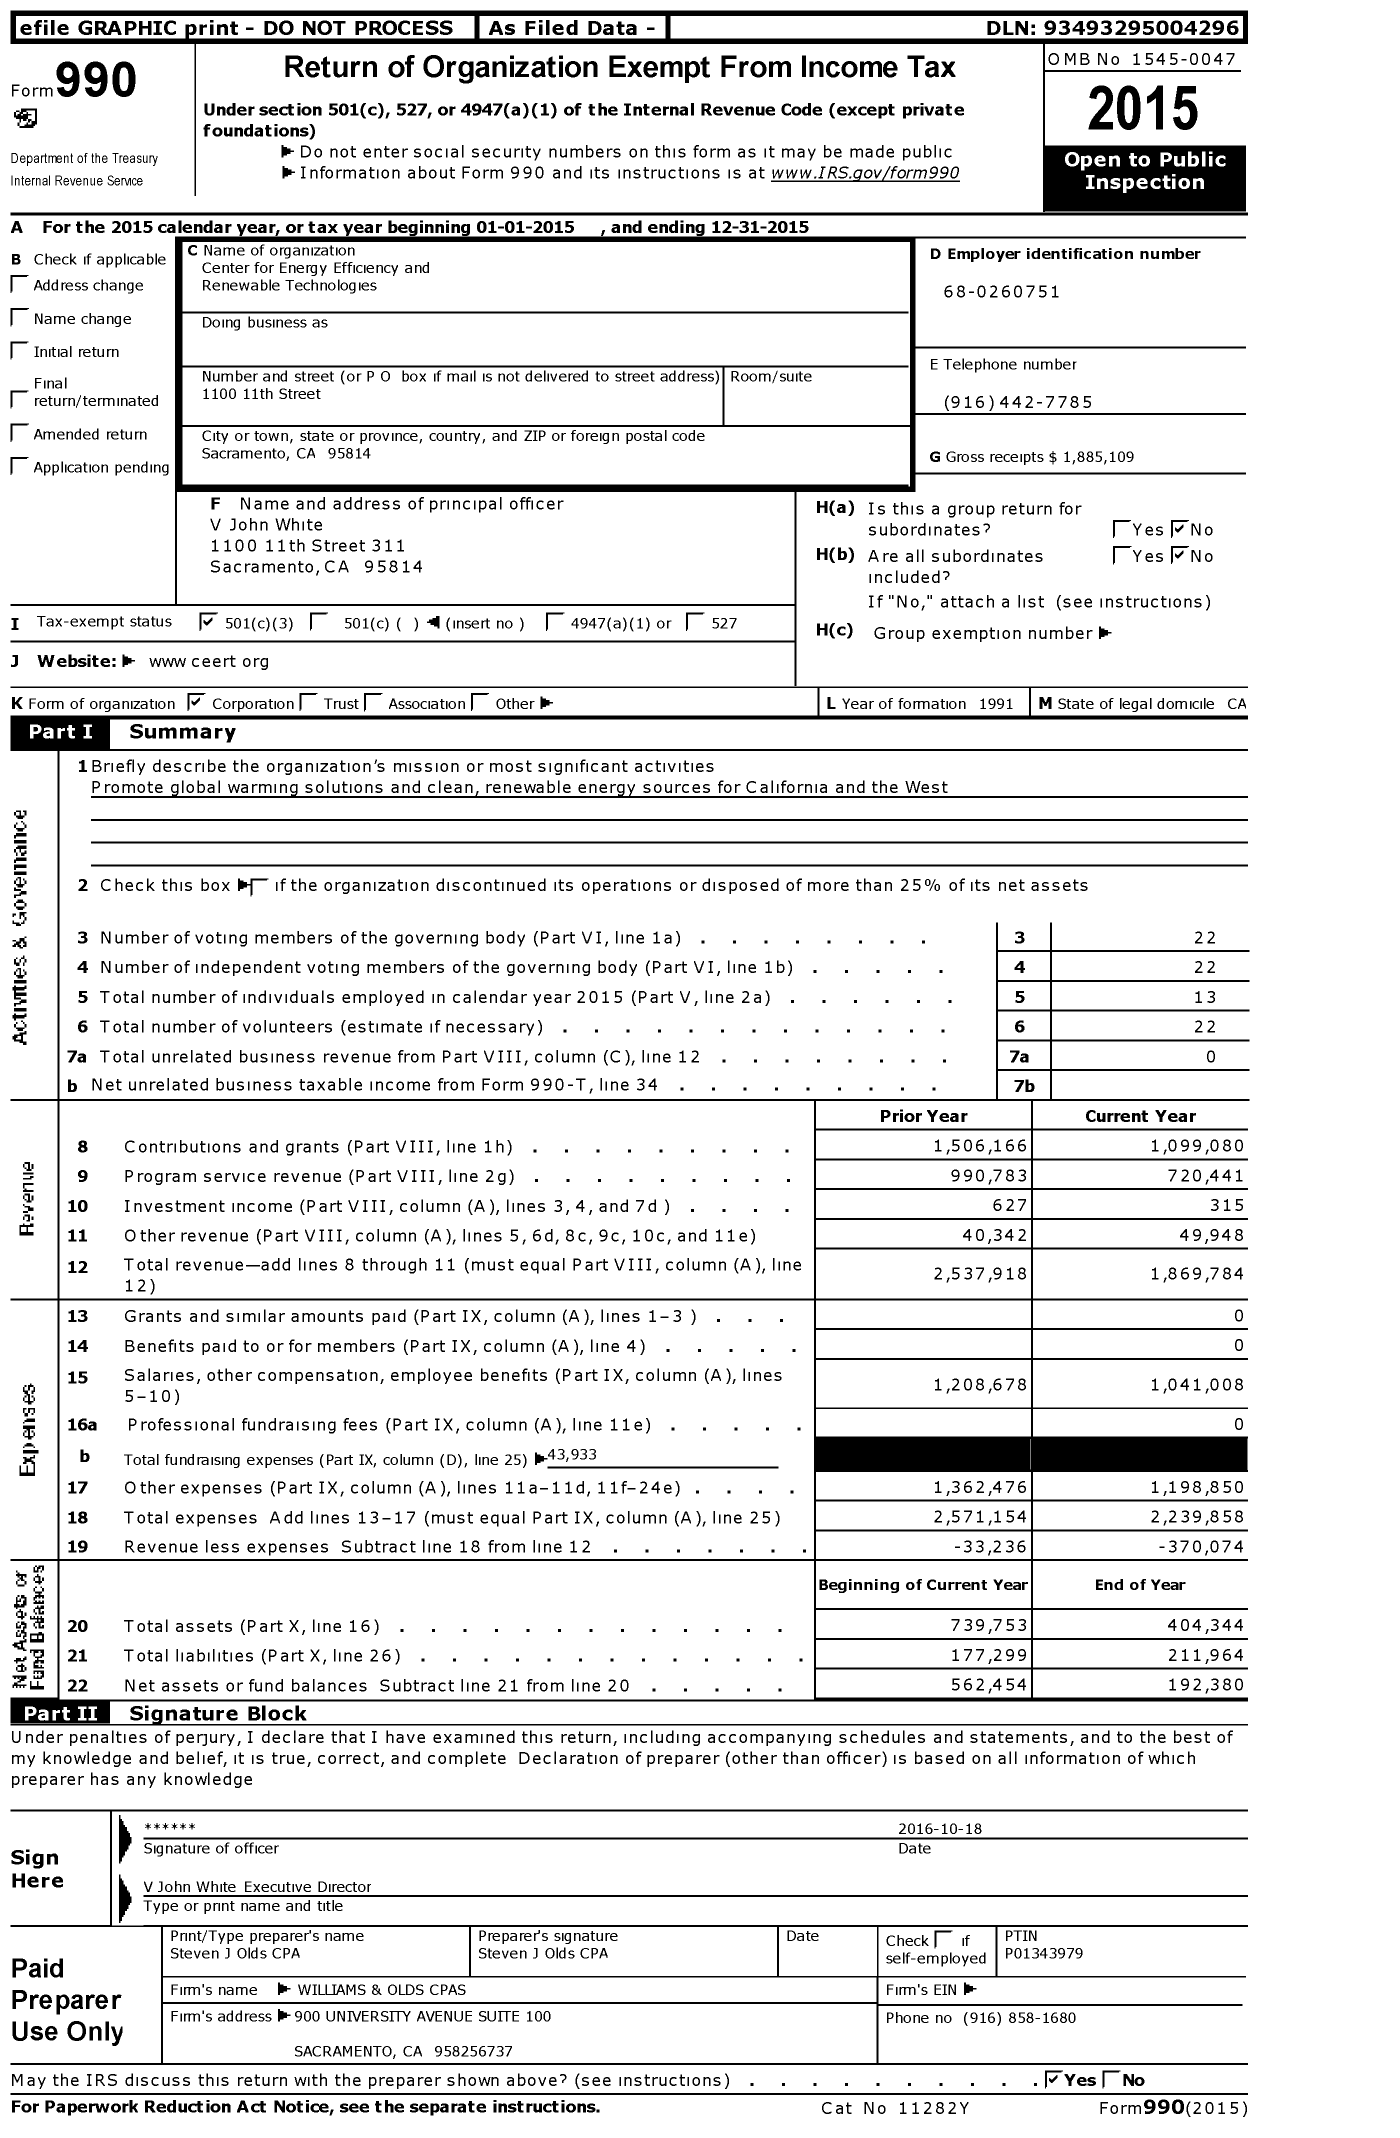 Image of first page of 2015 Form 990 for Center for Energy Efficiency and Renewable Technologies (CEERT)